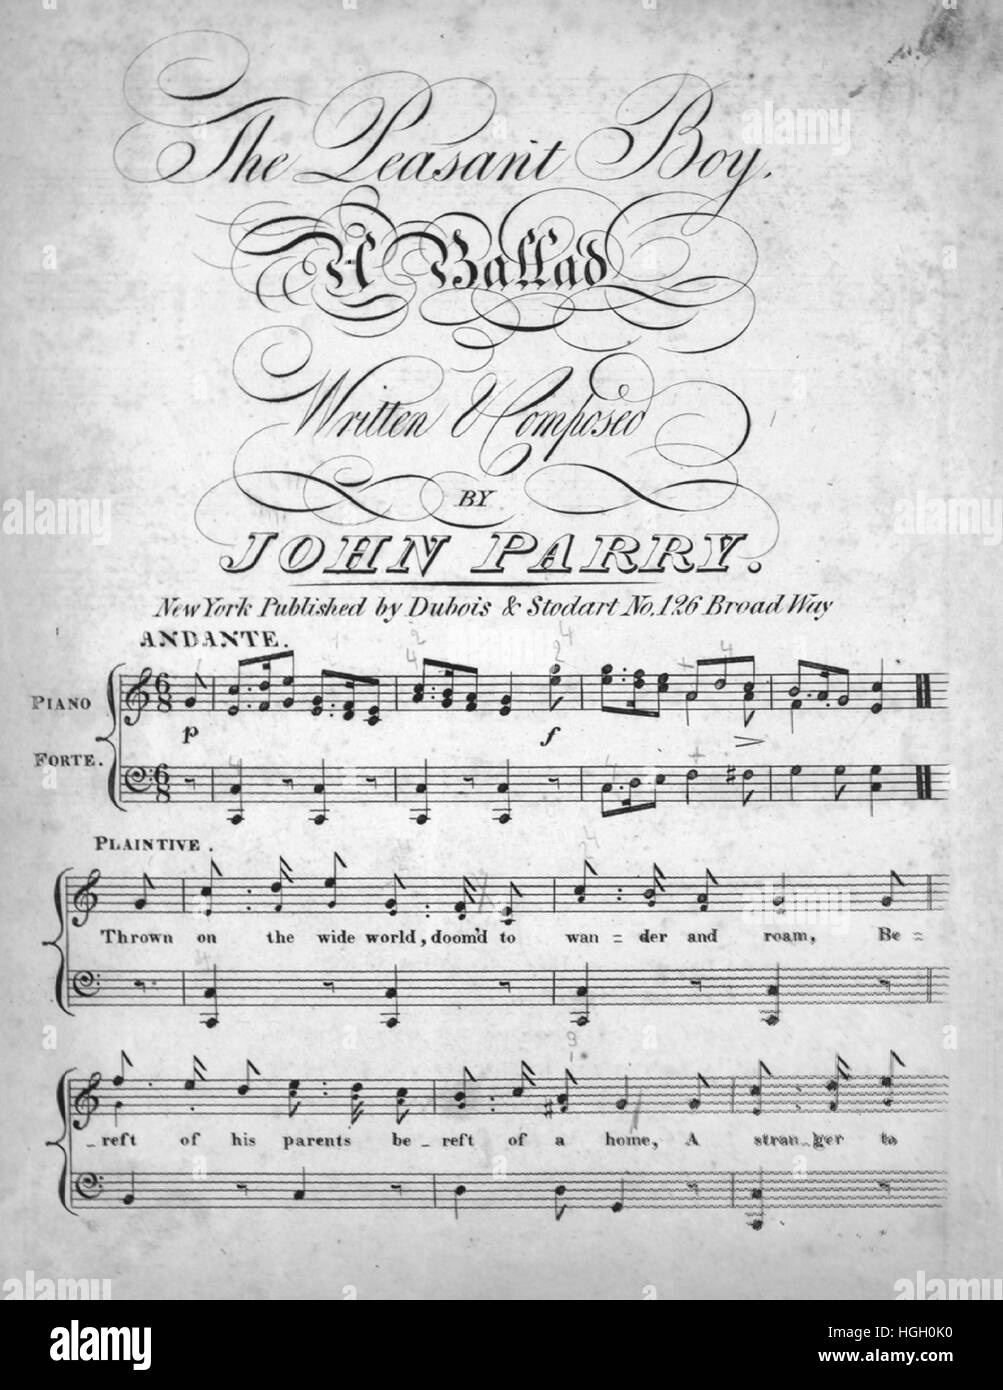 Sheet music cover image of the song 'The Peasant Boy A Ballad', with original authorship notes reading 'Written and Composed by John Parry', United States, 1900. The publisher is listed as 'Dubois and Stodart, No. 126 Broad Way', the form of composition is 'strophic with chorus', the instrumentation is 'piano and voice', the first line reads 'Thrown on the wide world, doom'd to wander and roam', and the illustration artist is listed as 'None'. Stock Photo